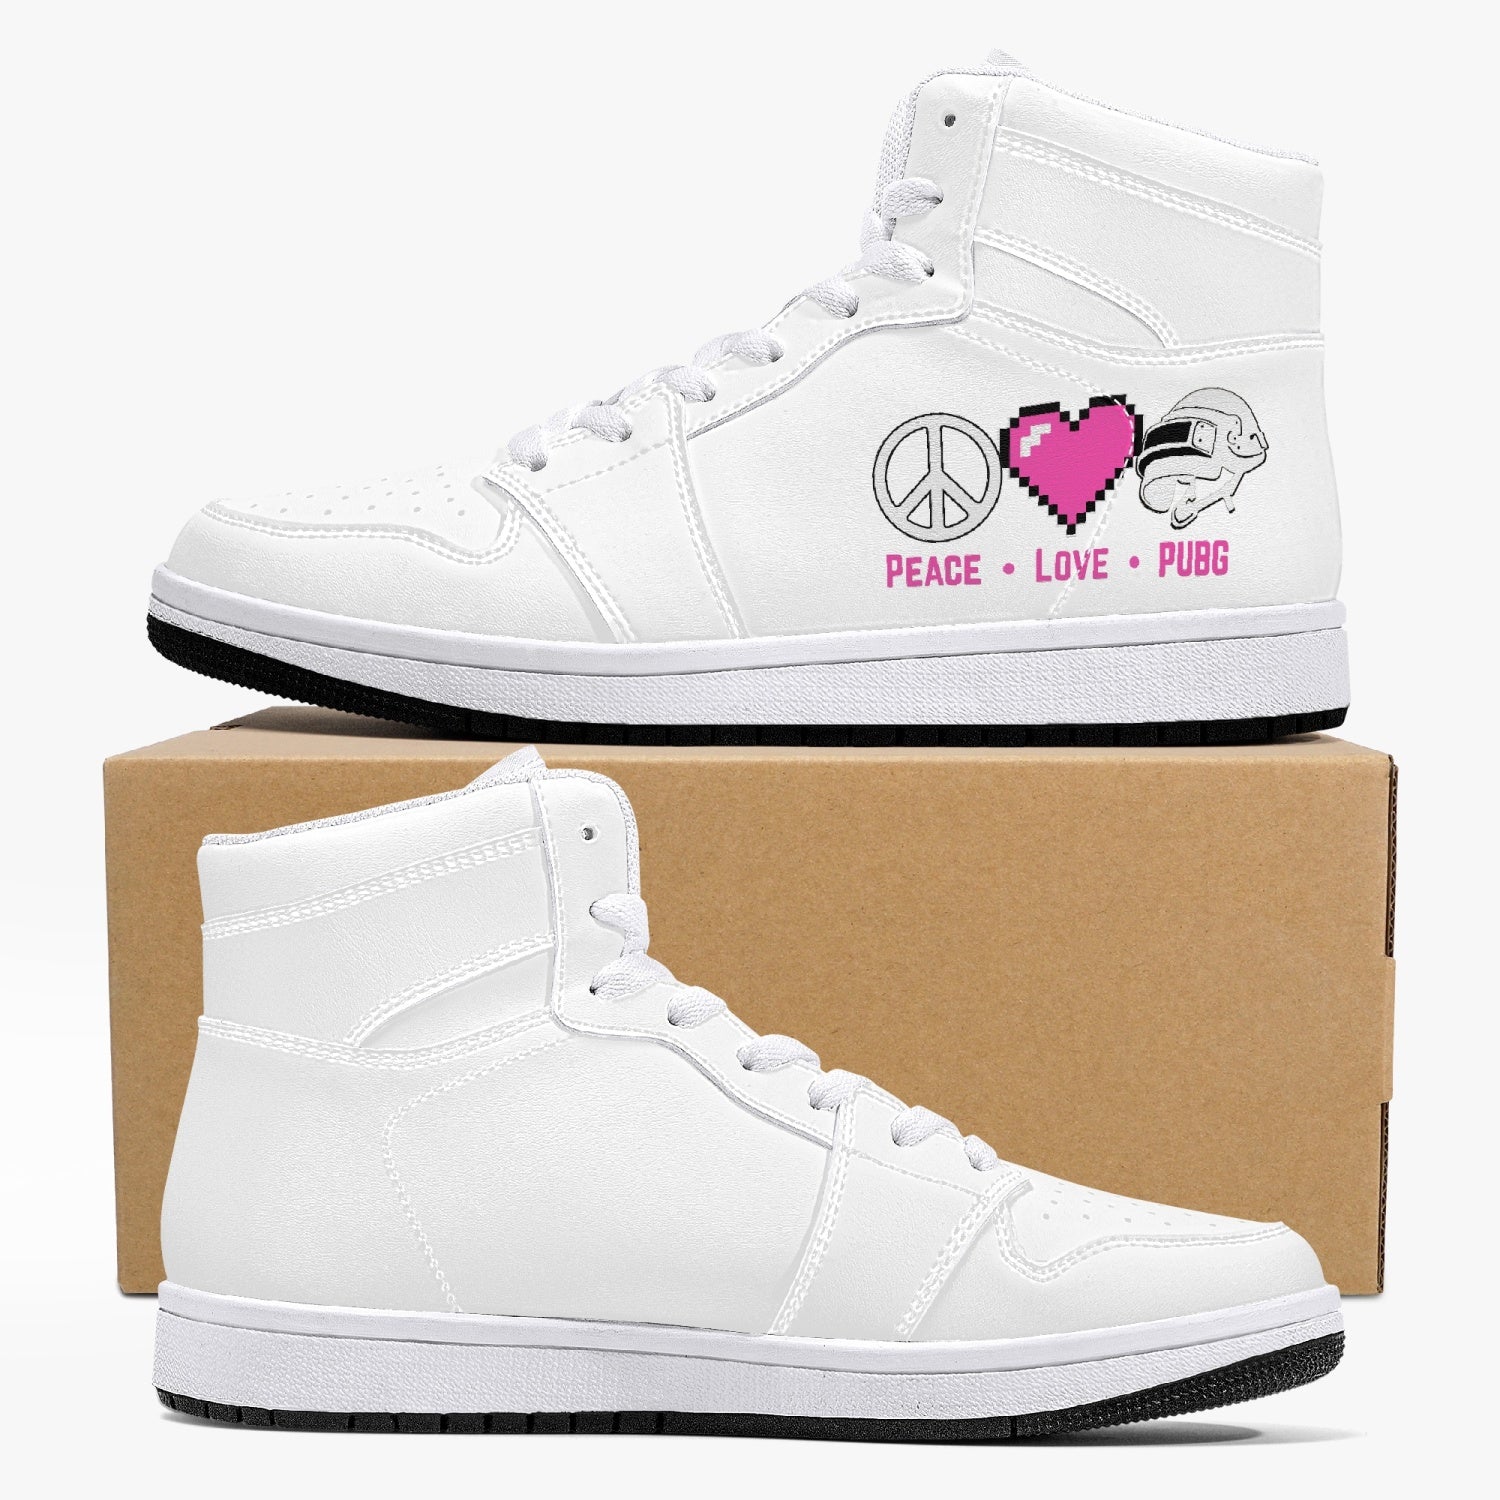 plp High-Top Leather Sneakers - White / Black